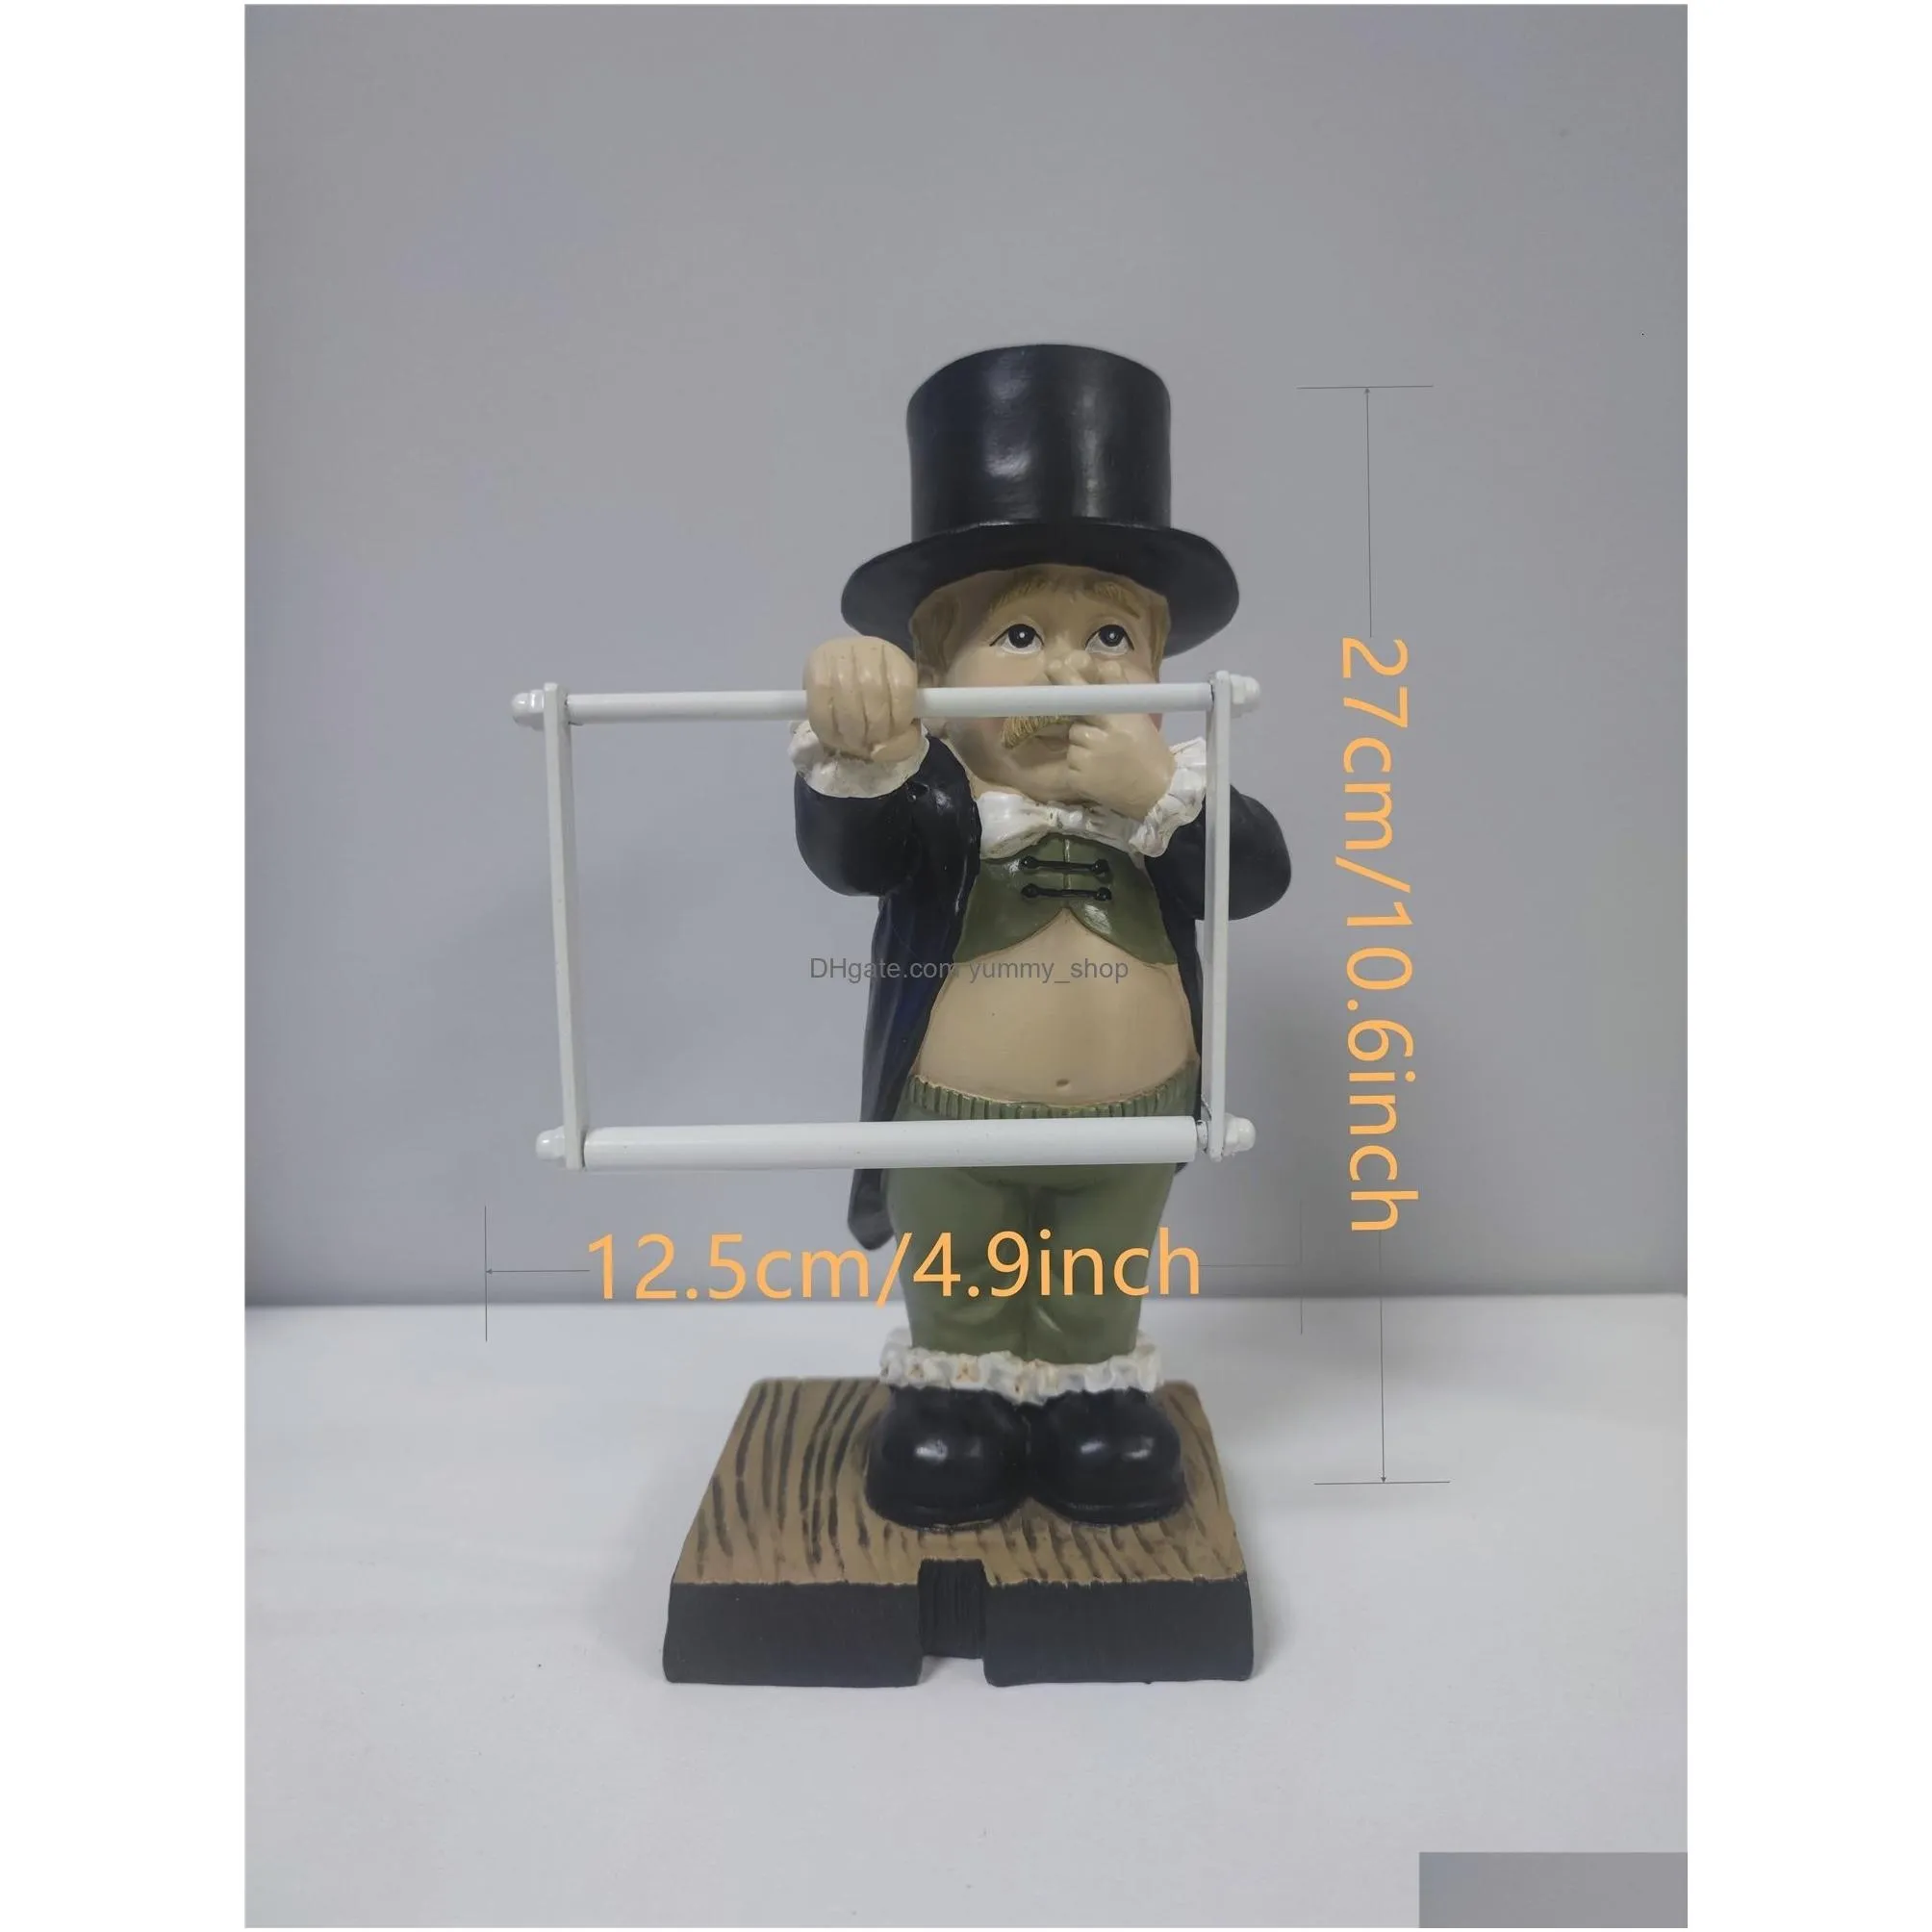 decorative objects figurines creative spoof paper holder statue cute funny resin butler shape tissue stand rack sculpture for toilet decoration